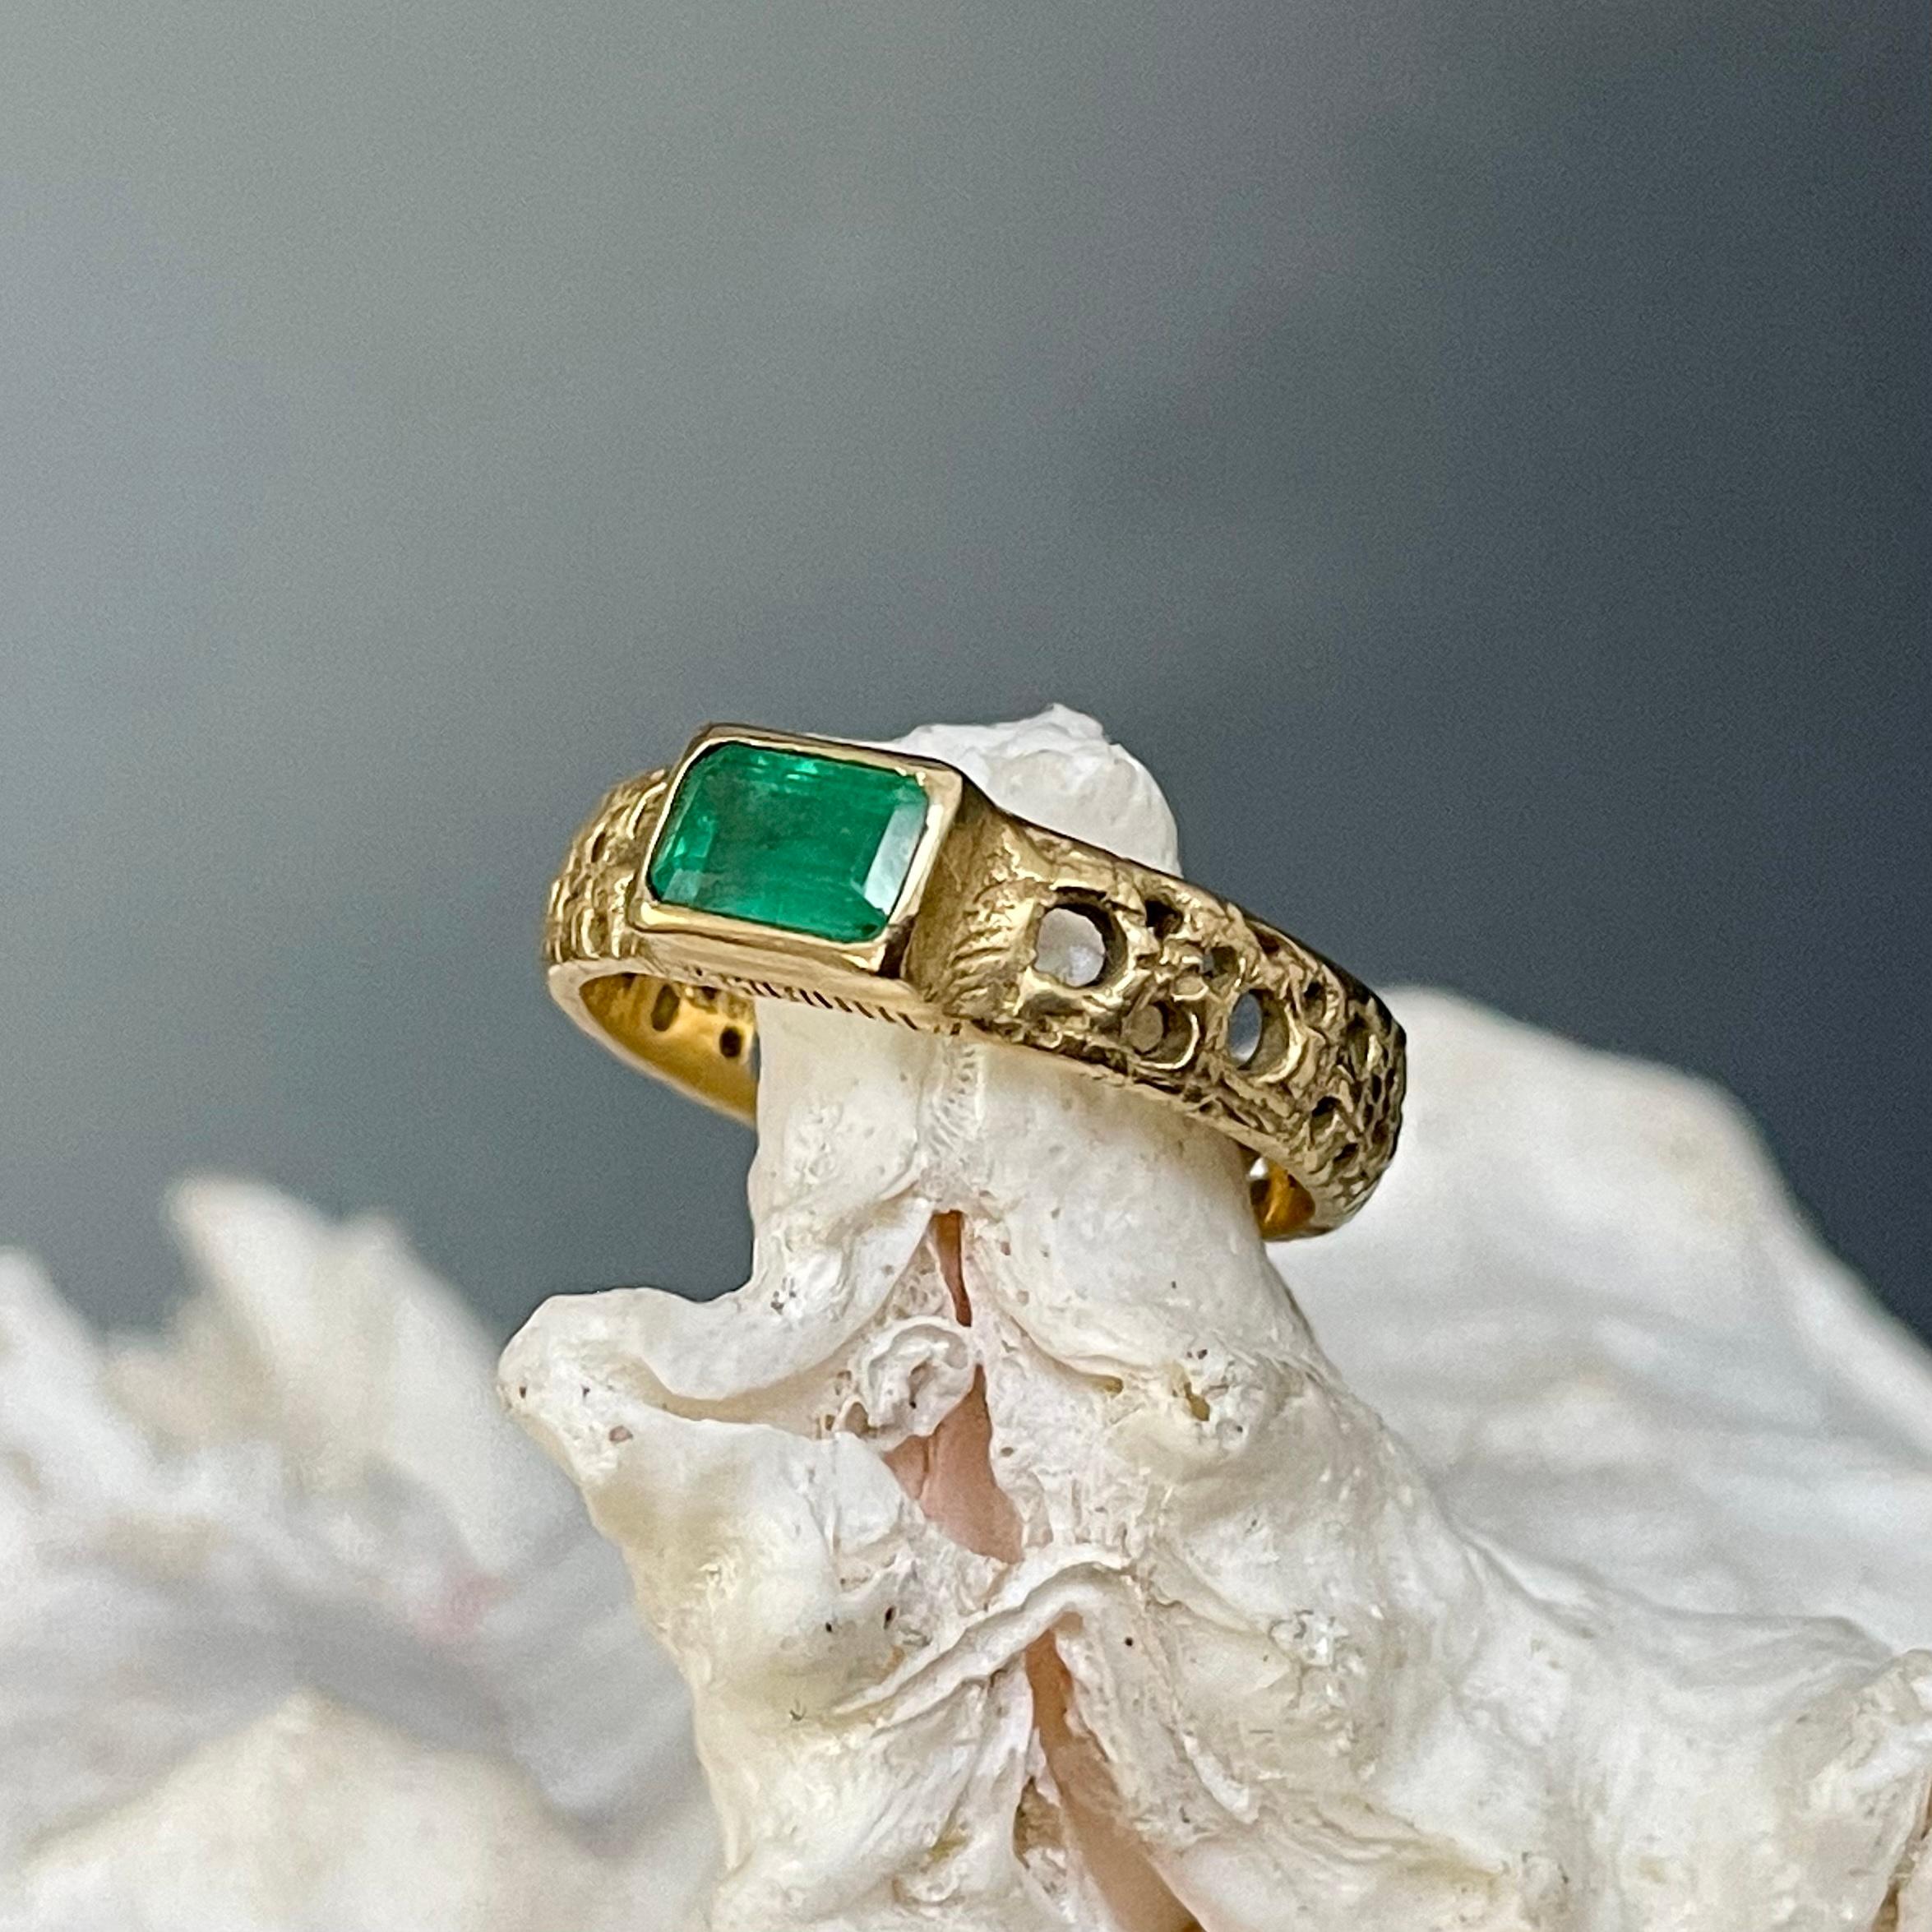 Steve Battelle 0.8 Carat Emerald 18K Gold Ring In New Condition For Sale In Soquel, CA